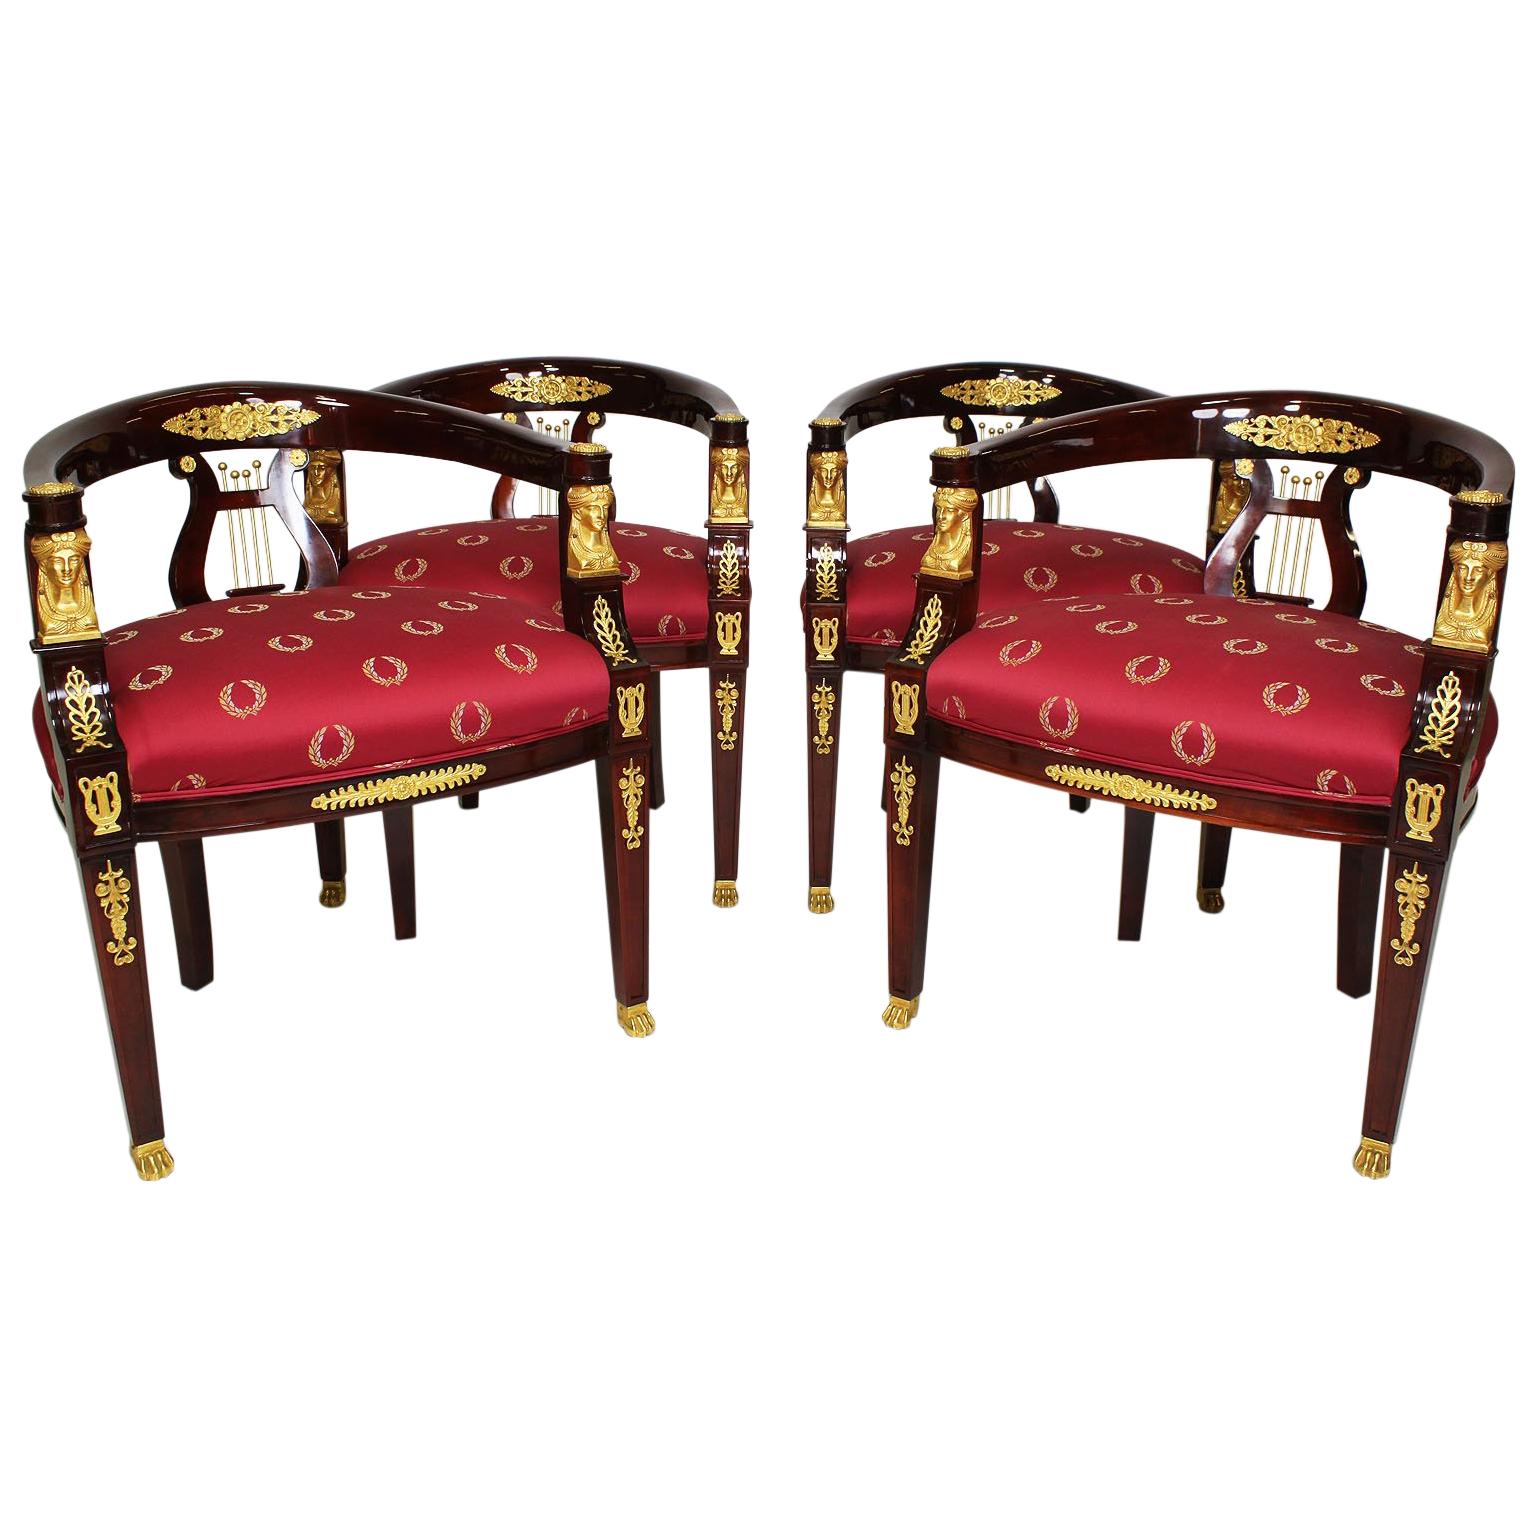 A Pair of French Empire Revival Style Mahogany & Gilt-Bronze Mounted Game Chairs For Sale